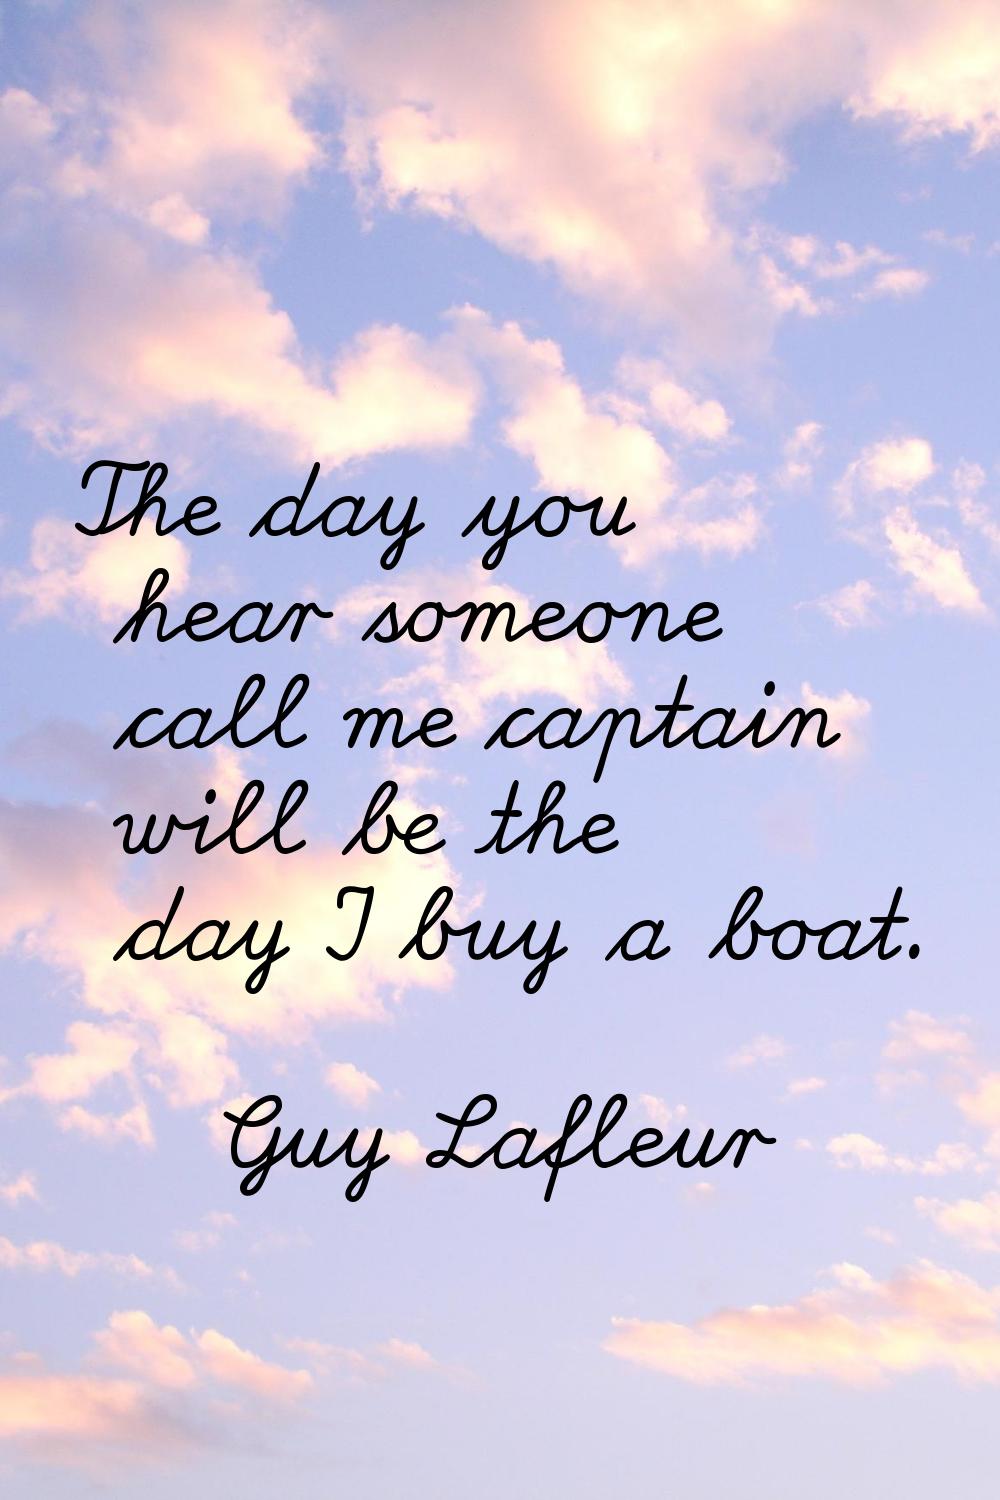 The day you hear someone call me captain will be the day I buy a boat.